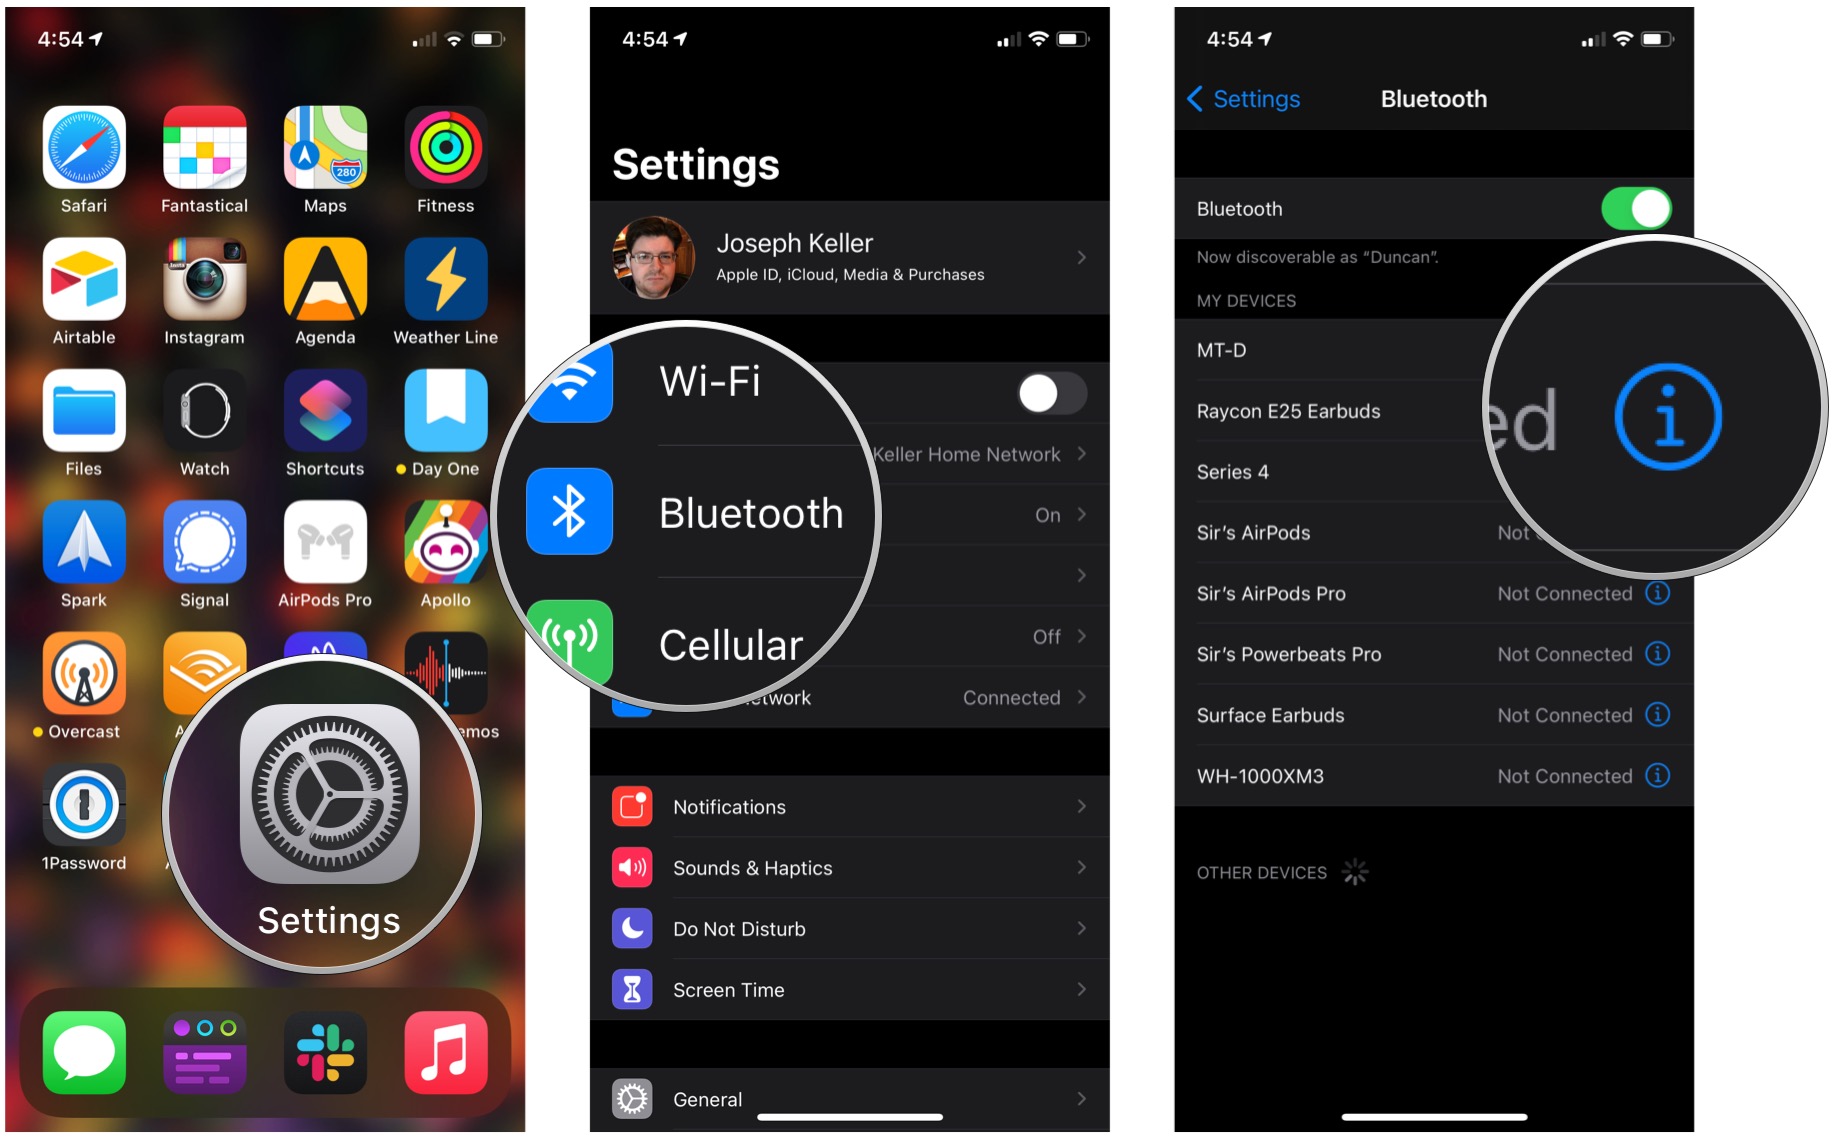 Forget a Bluetooth device, showing how to open settings, tap Bluetooth, then tap the i button